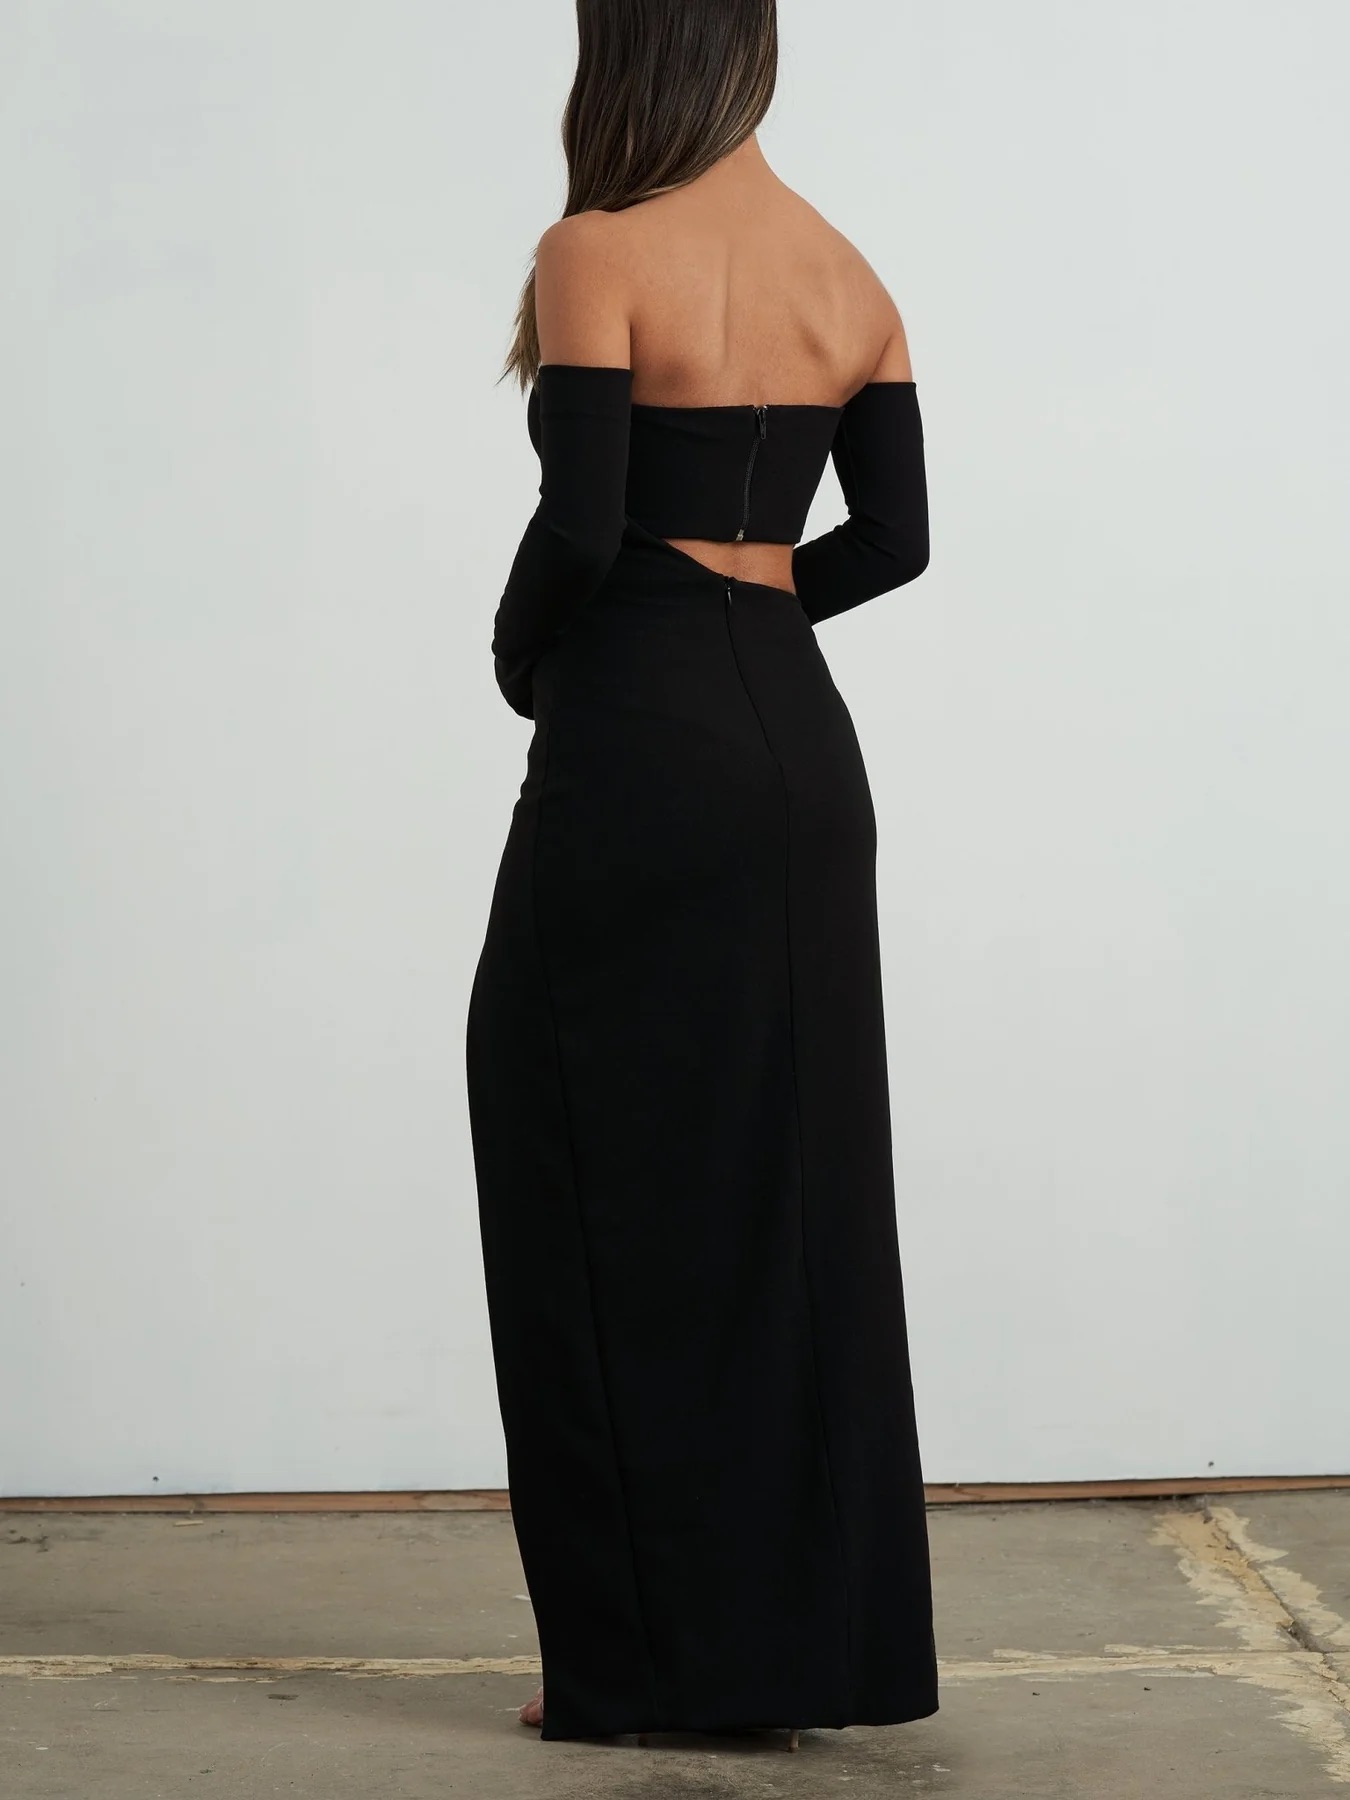 111-hall-of-fame-gown-black-847939 1800x1800